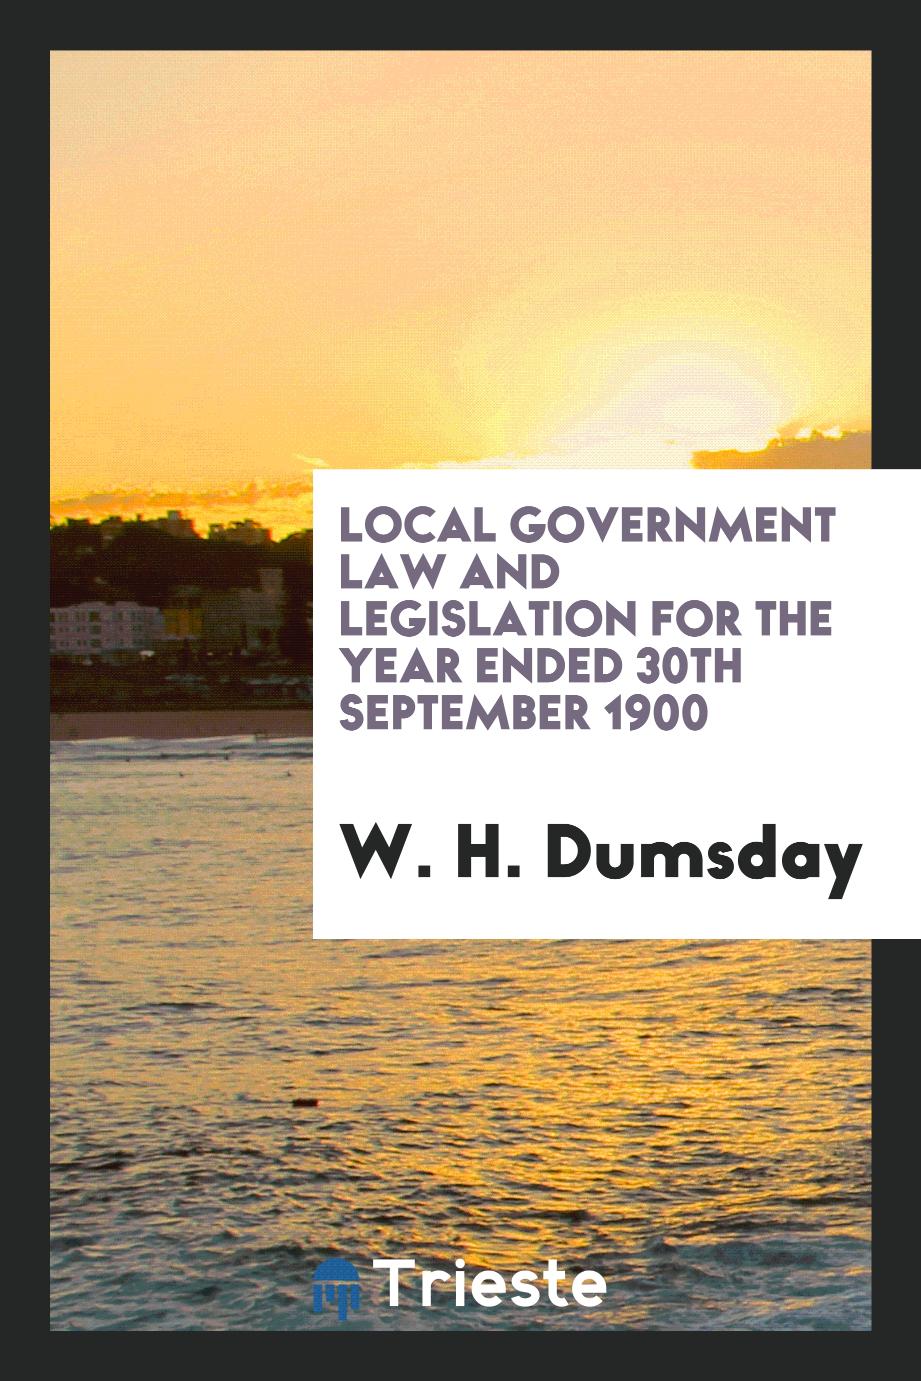 Local Government Law and Legislation for the Year Ended 30th September 1900